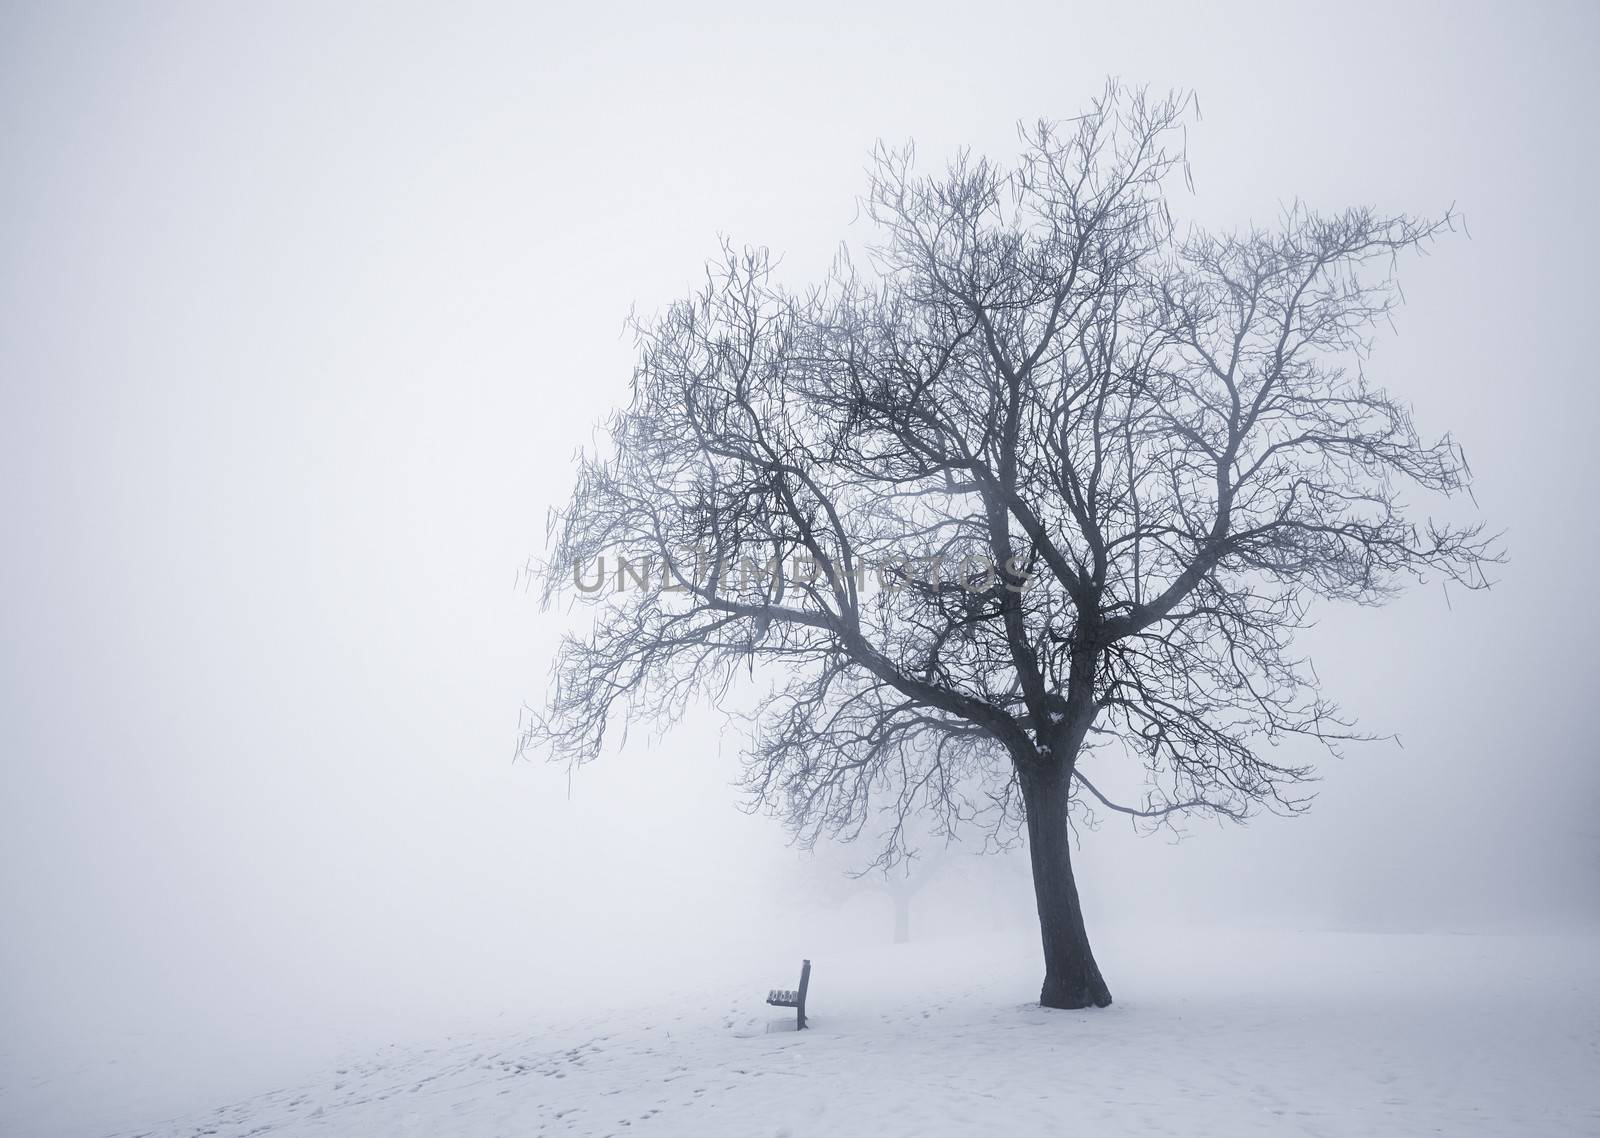 Winter scene of leafless tree and park bench in fog